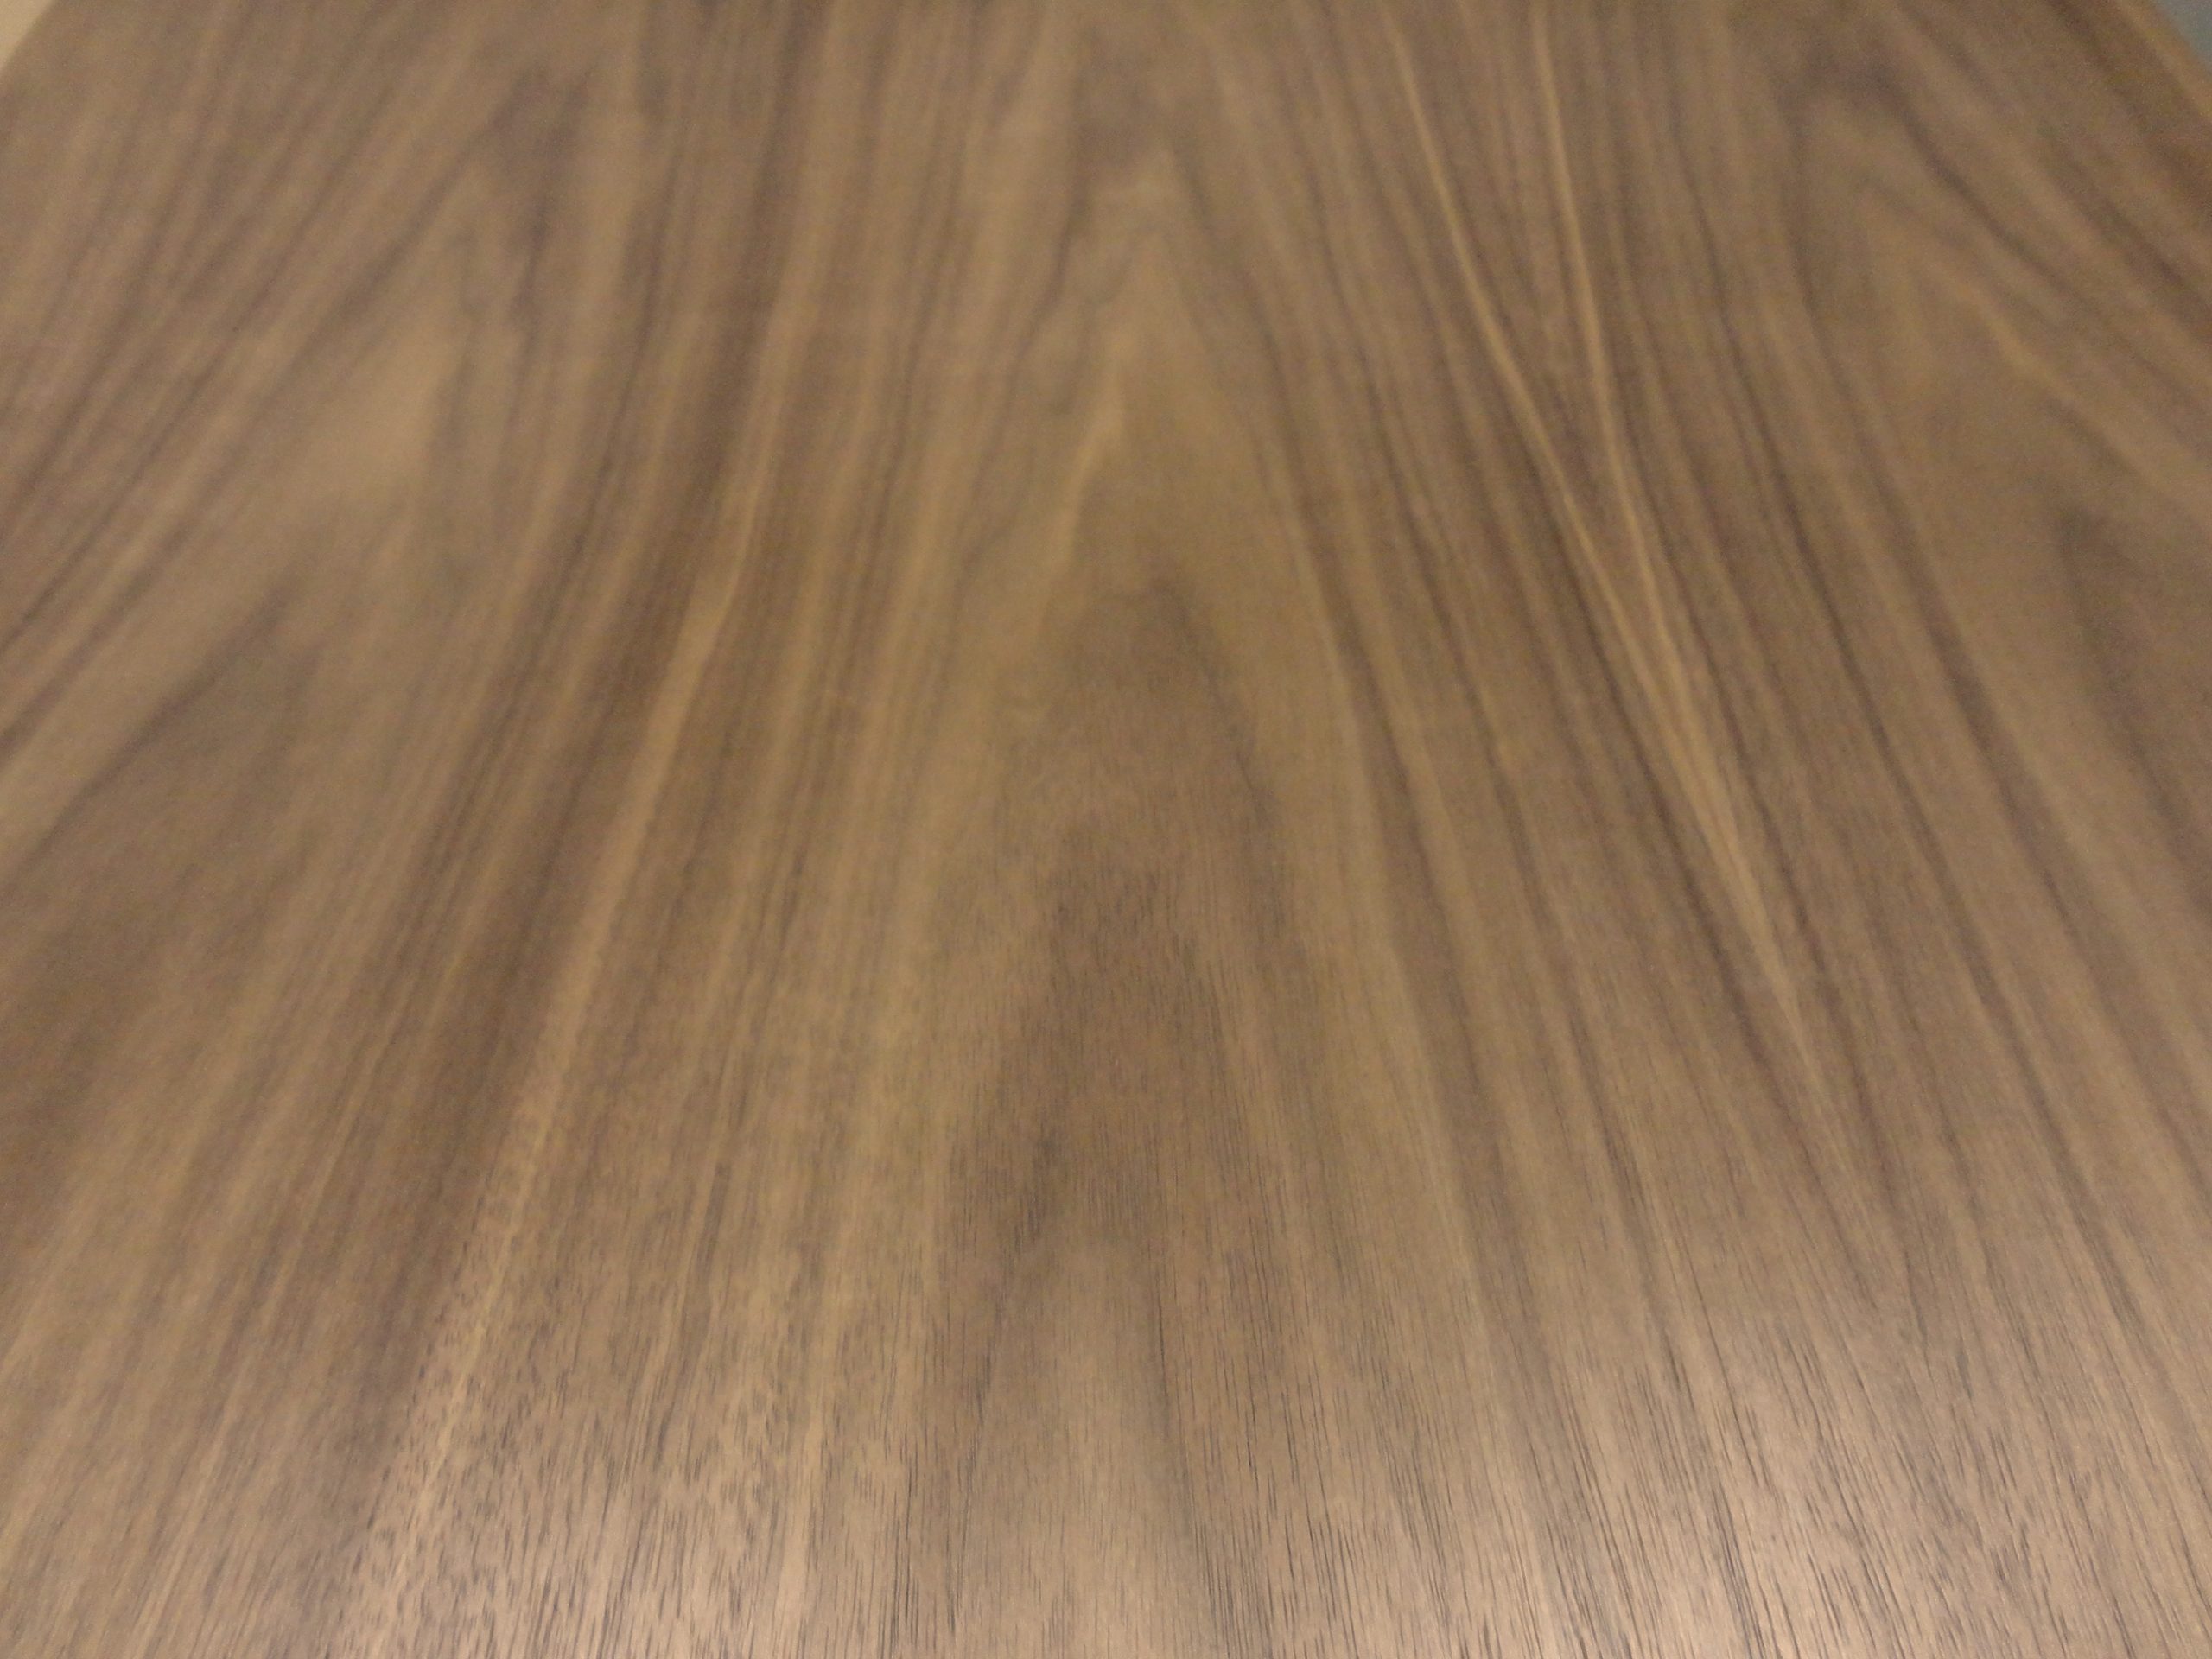 Curly Figured Maple wood veneer 48" x 96" with paper backer 1/40th" thick "AA" 